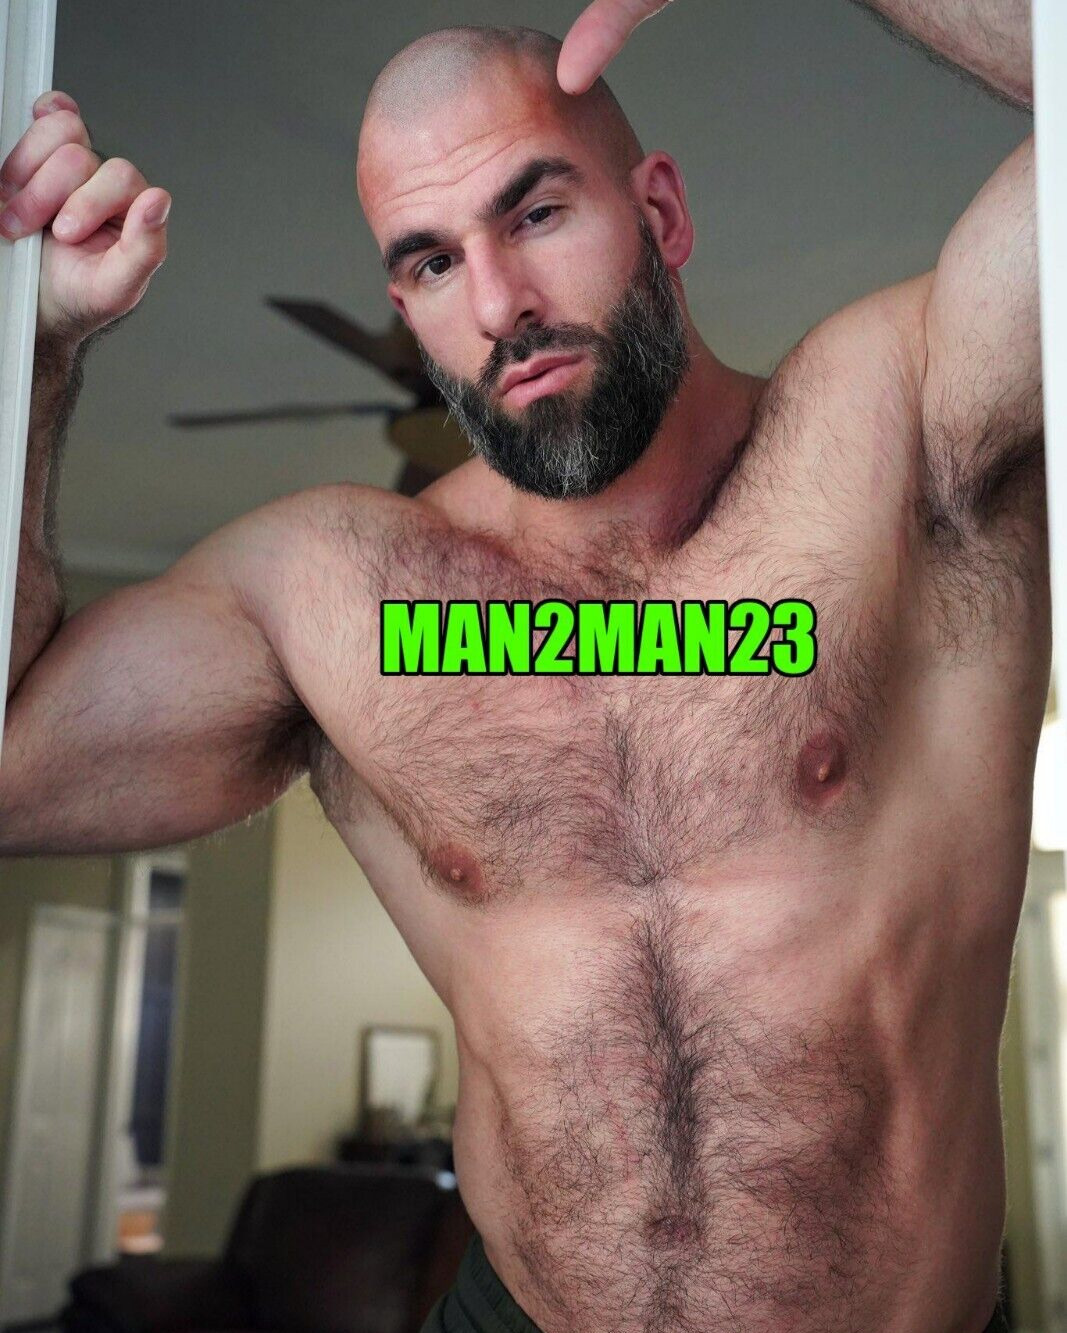 NICK HAIRY & HUNG MUSCLE DADDY SEXY & SHIRTLESS 8x10 COLOR PHOTO #7C